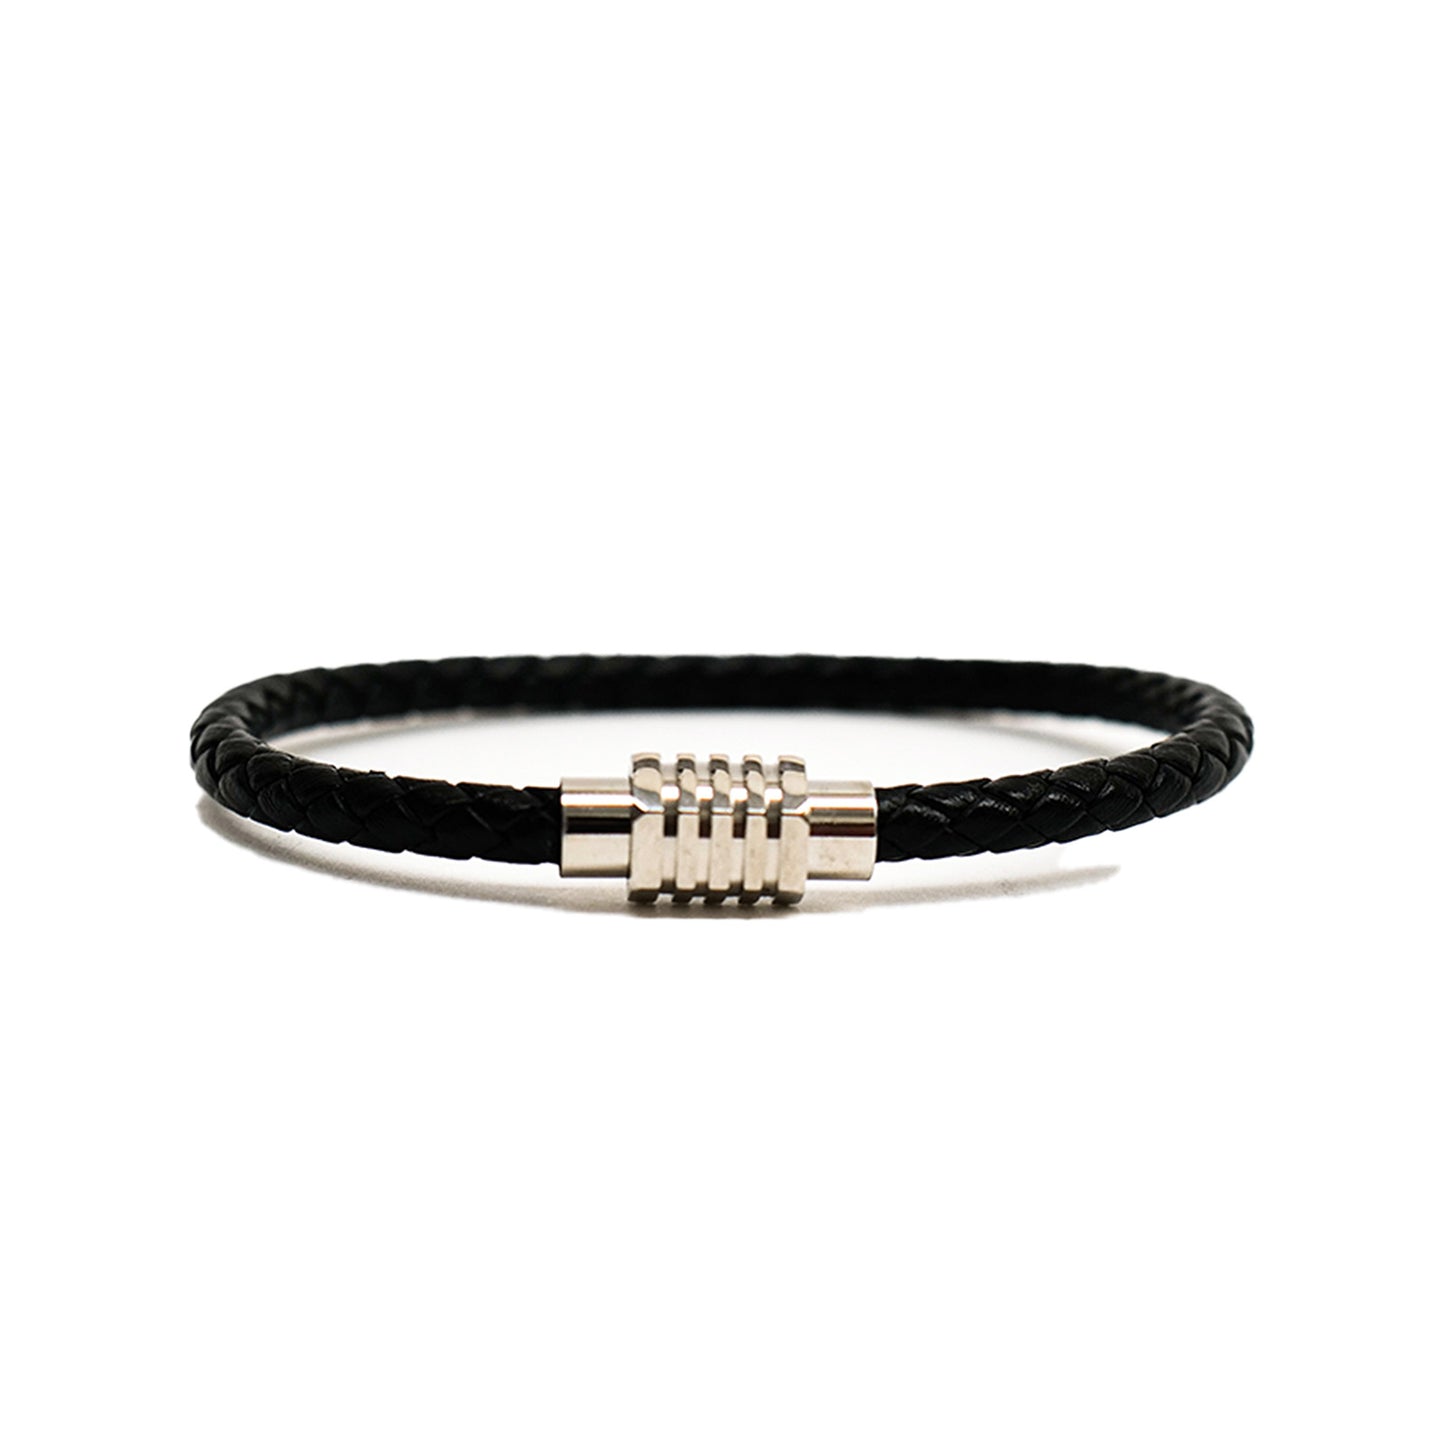 Stainless Steel leather Braided Bracelet